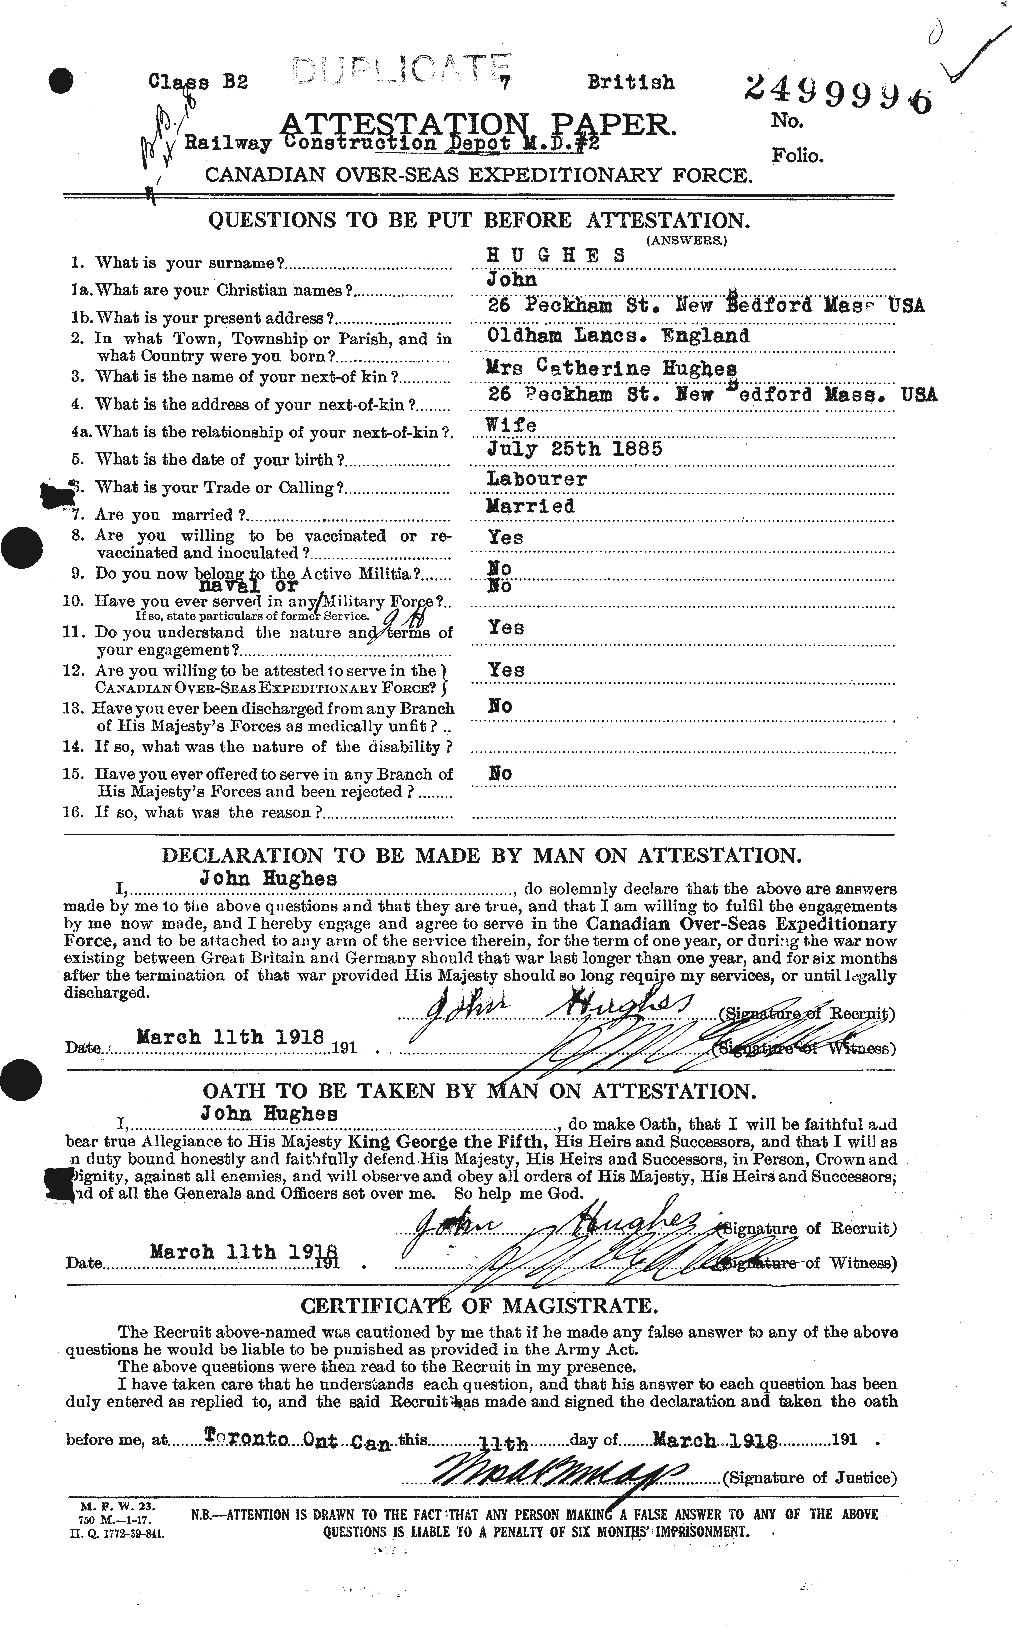 Personnel Records of the First World War - CEF 403978a